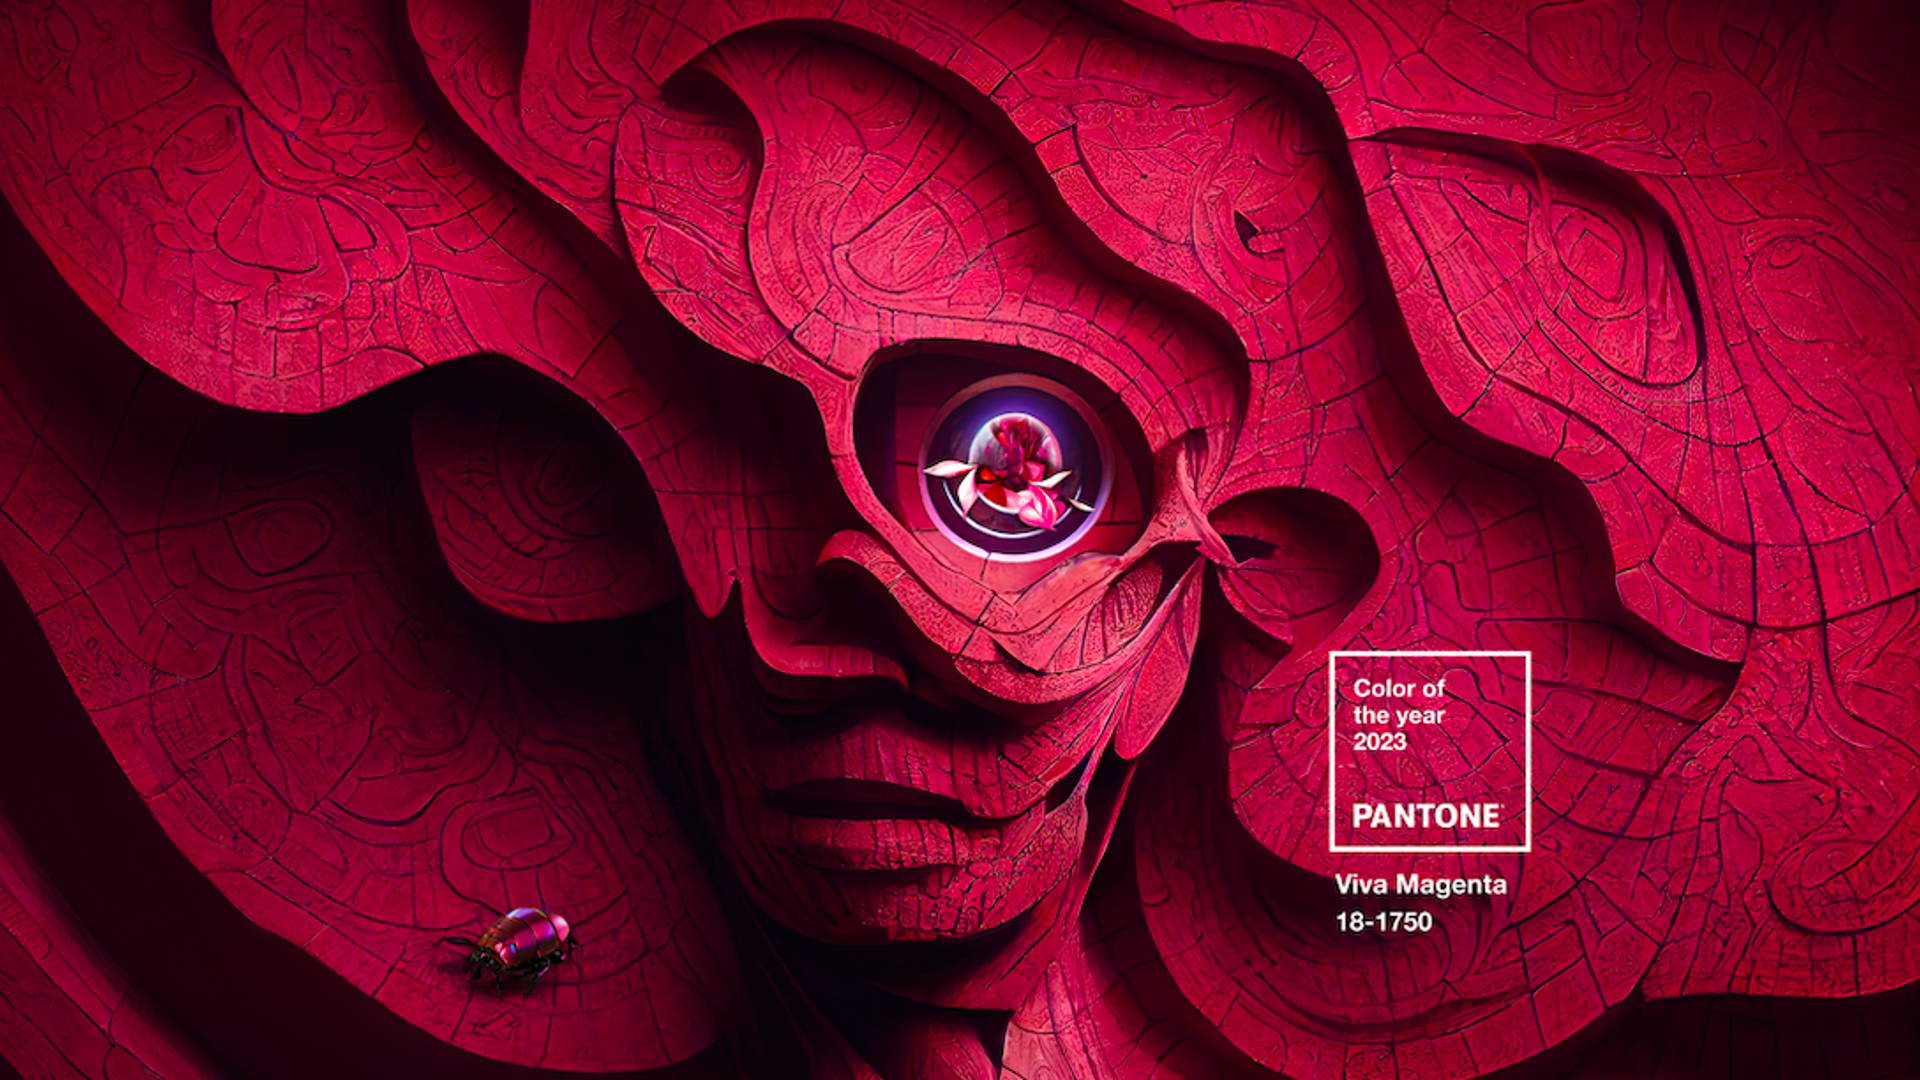 Welcome To the Magentaverse: Pantone's 2023 Color of the Year is Viva Magenta. Dieline, Branding & Packaging Inspiration